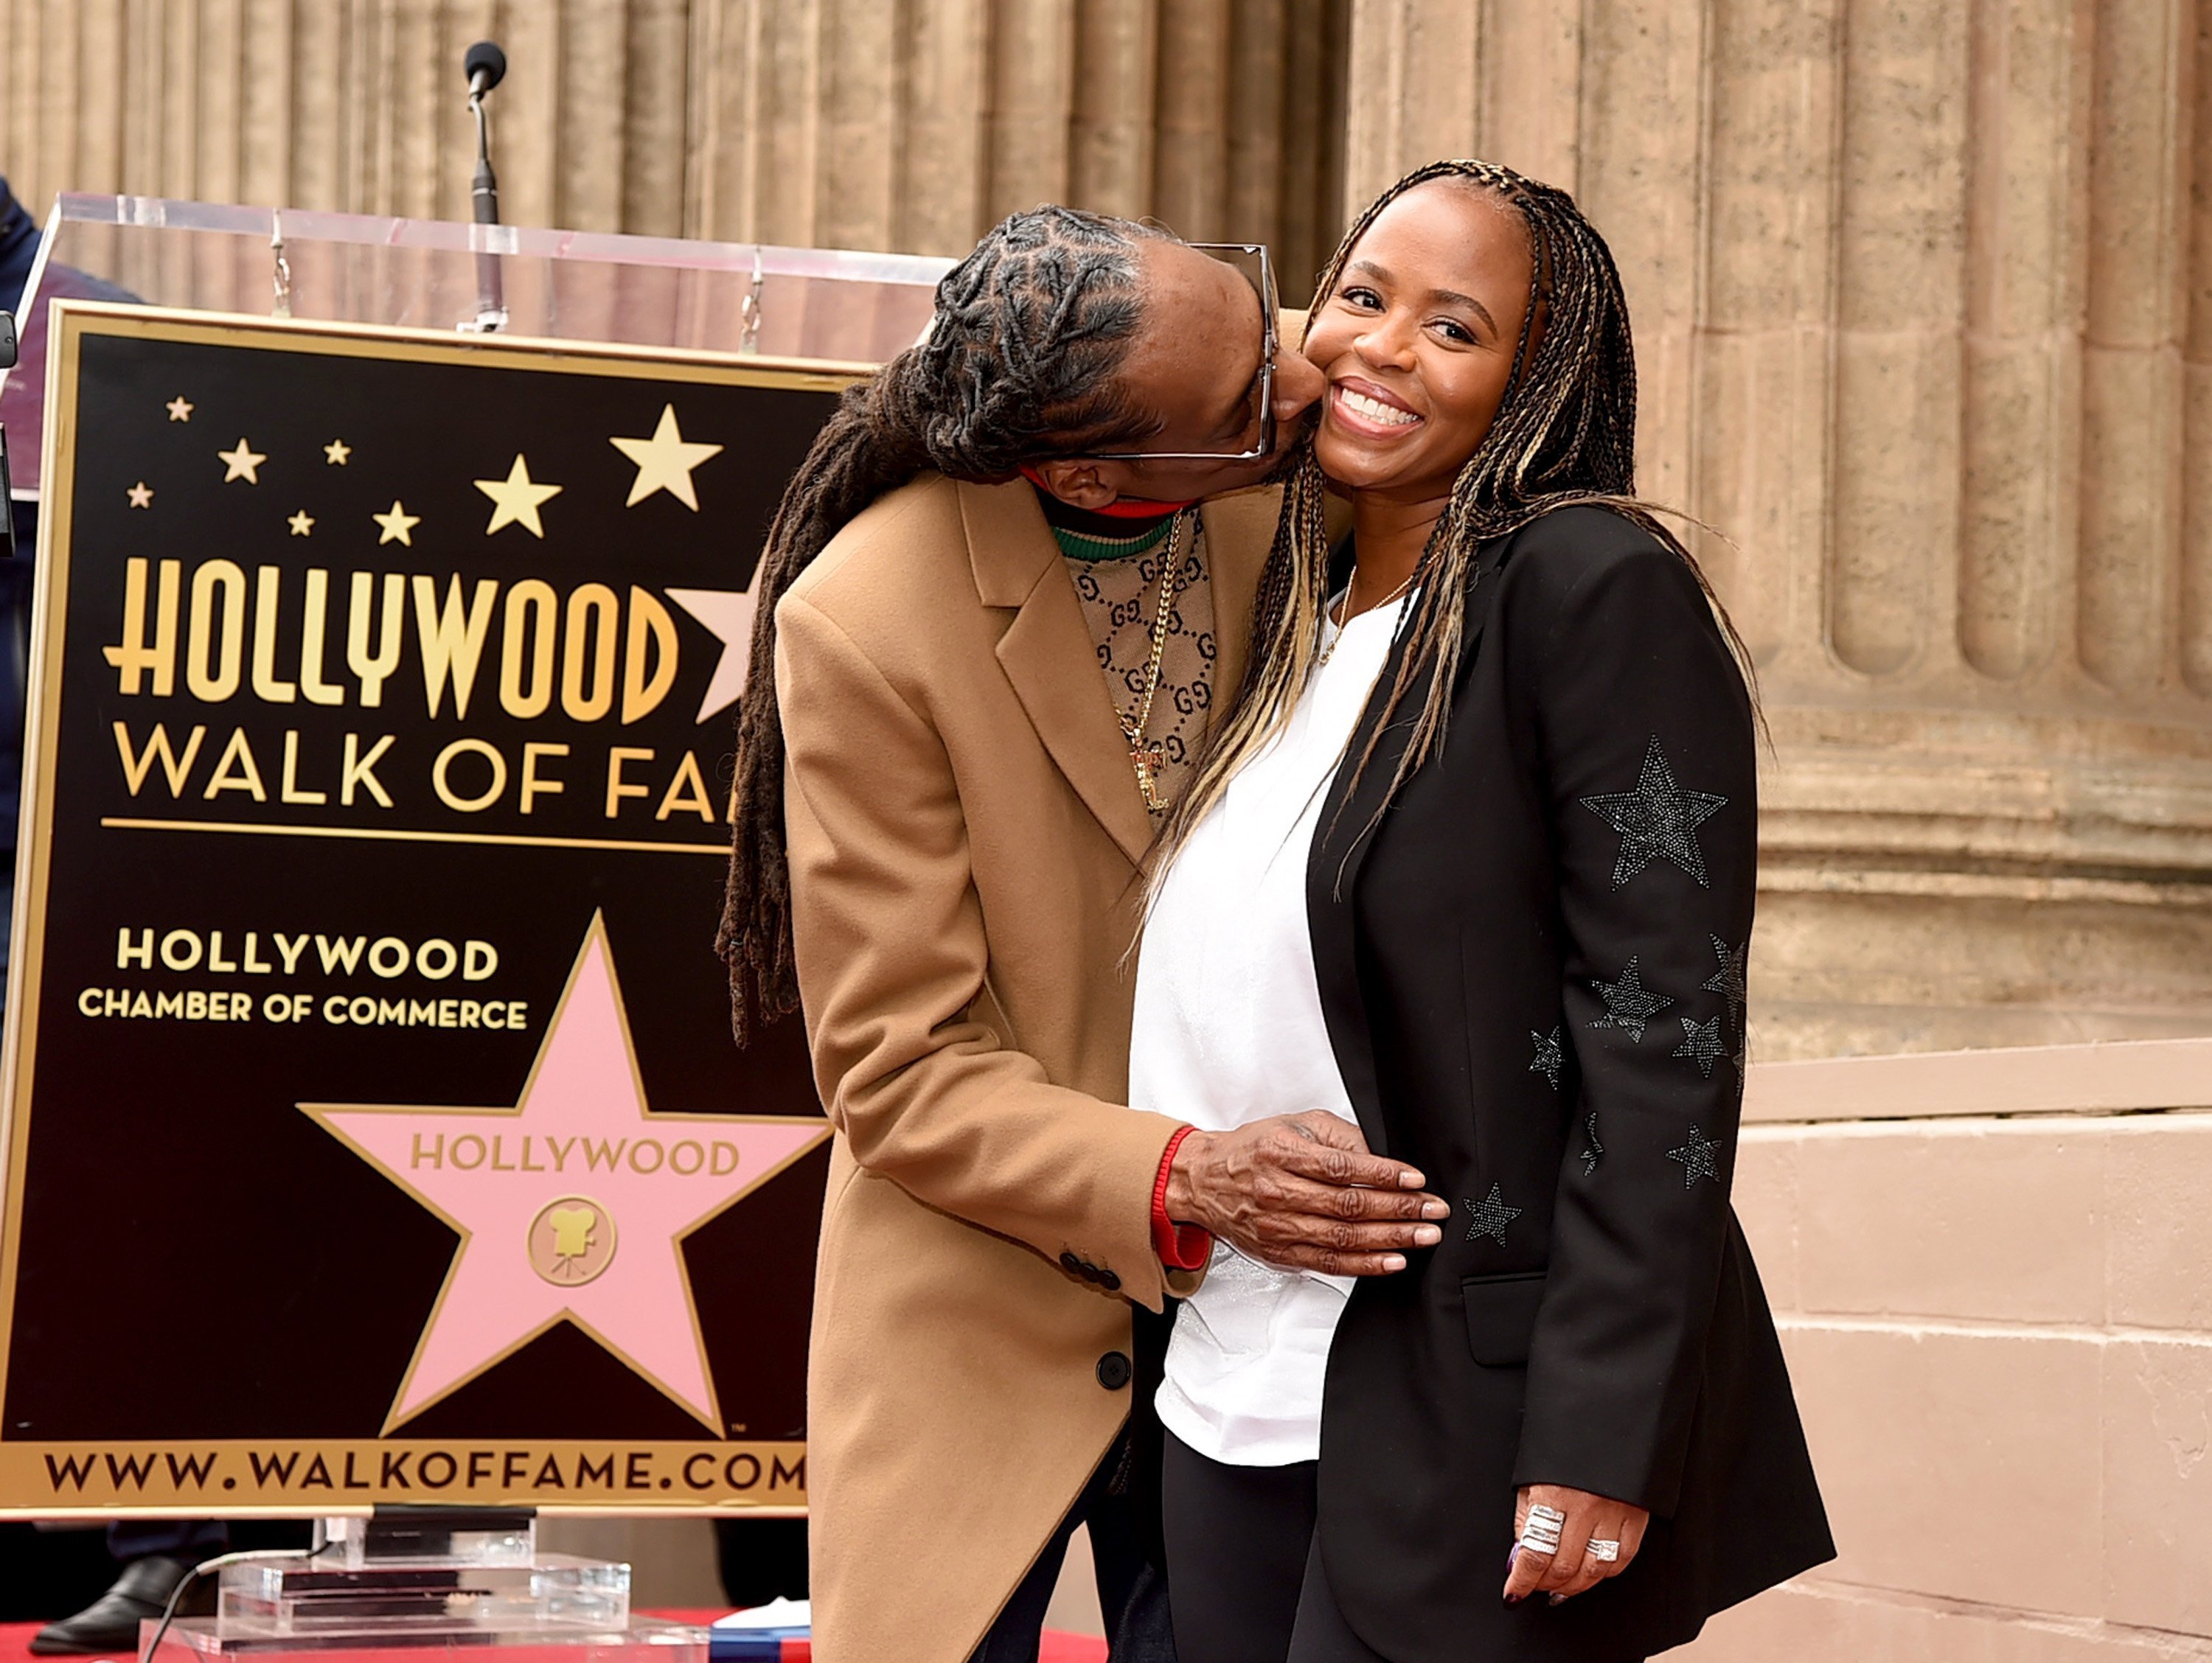 Snoop Dogg with his wife Shante Broadus on the Hollywood Walk of Fame on Hollywood Boulevard on November 19, 2018. | Photo: Getty Images